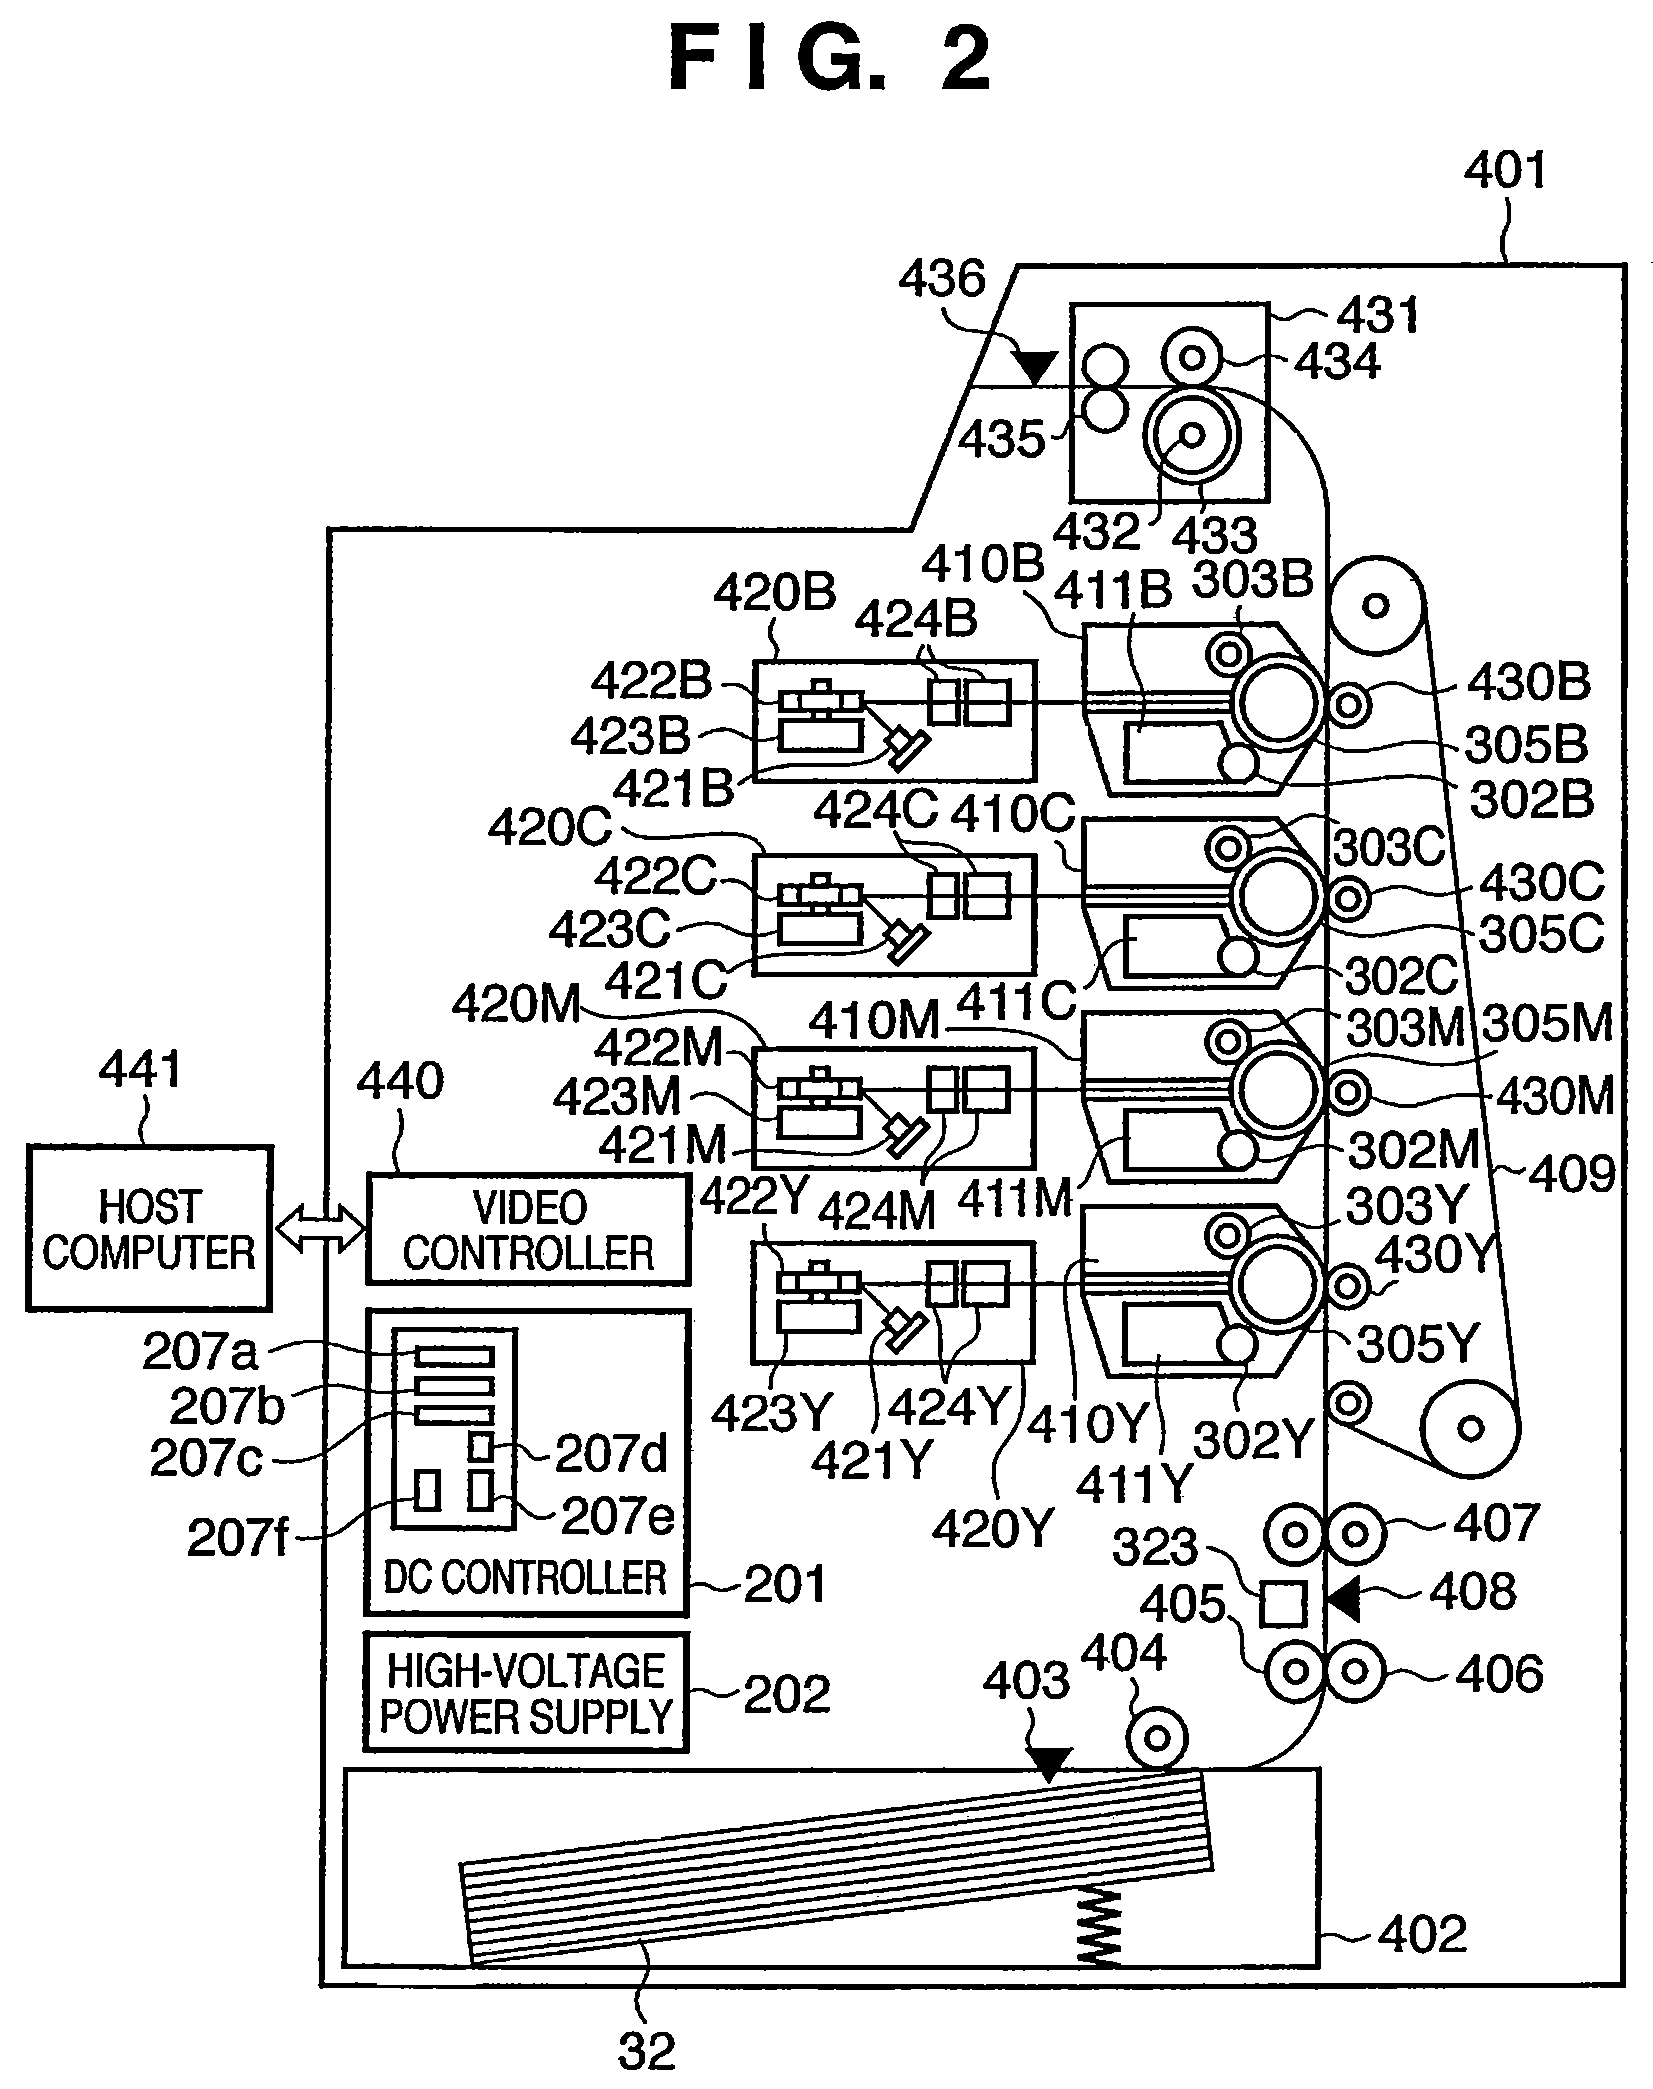 Power supply unit in image forming apparatus